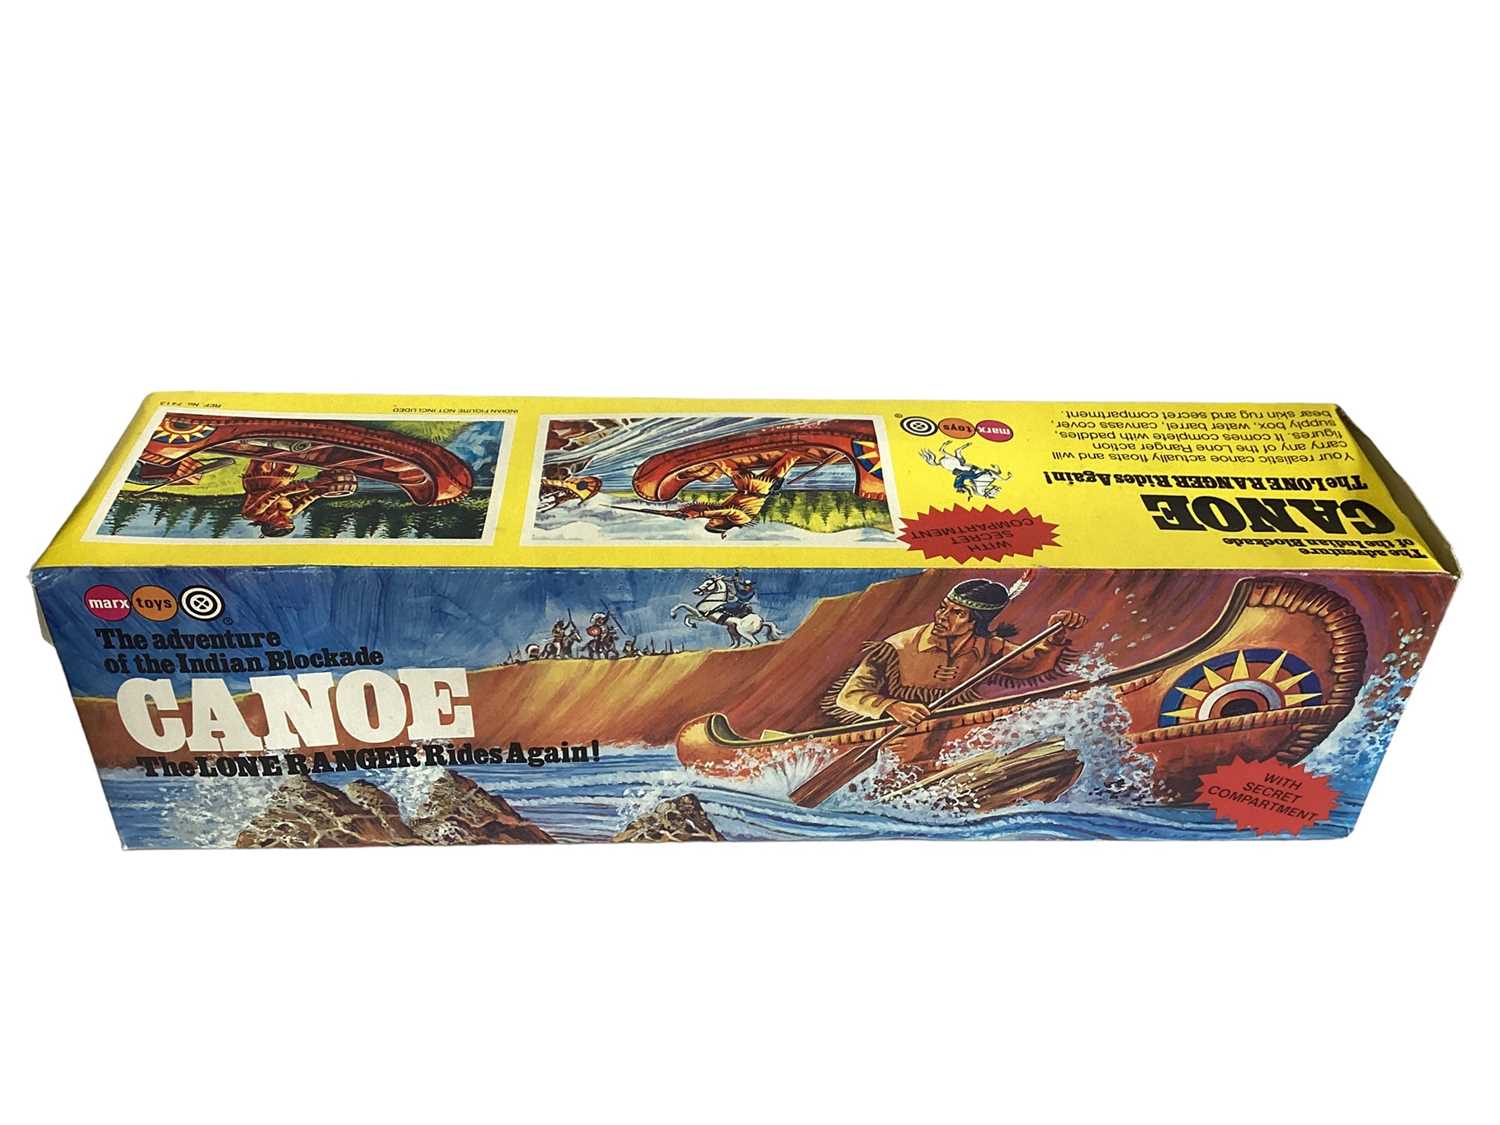 Marx Toys (c1973) The Lone Ranger Rides Again Canoe from The Adventure of the Indian Blockade, boxed - Image 6 of 6